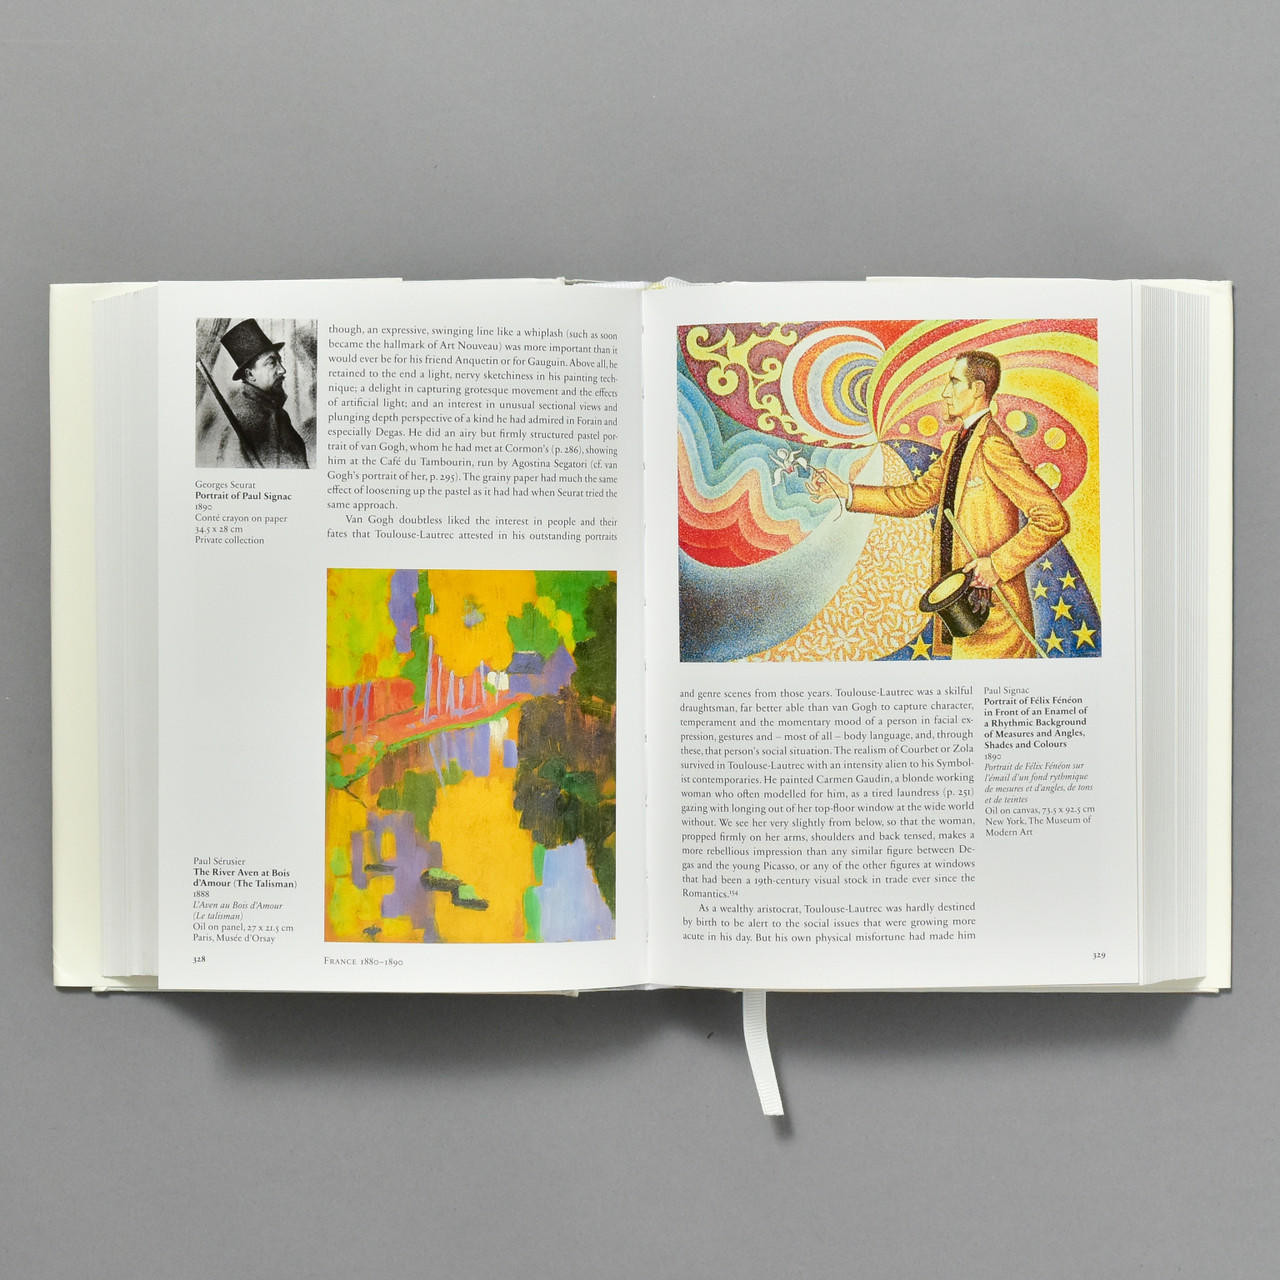 TASCHEN Books: Modern Art. A History from Impressionism to Today